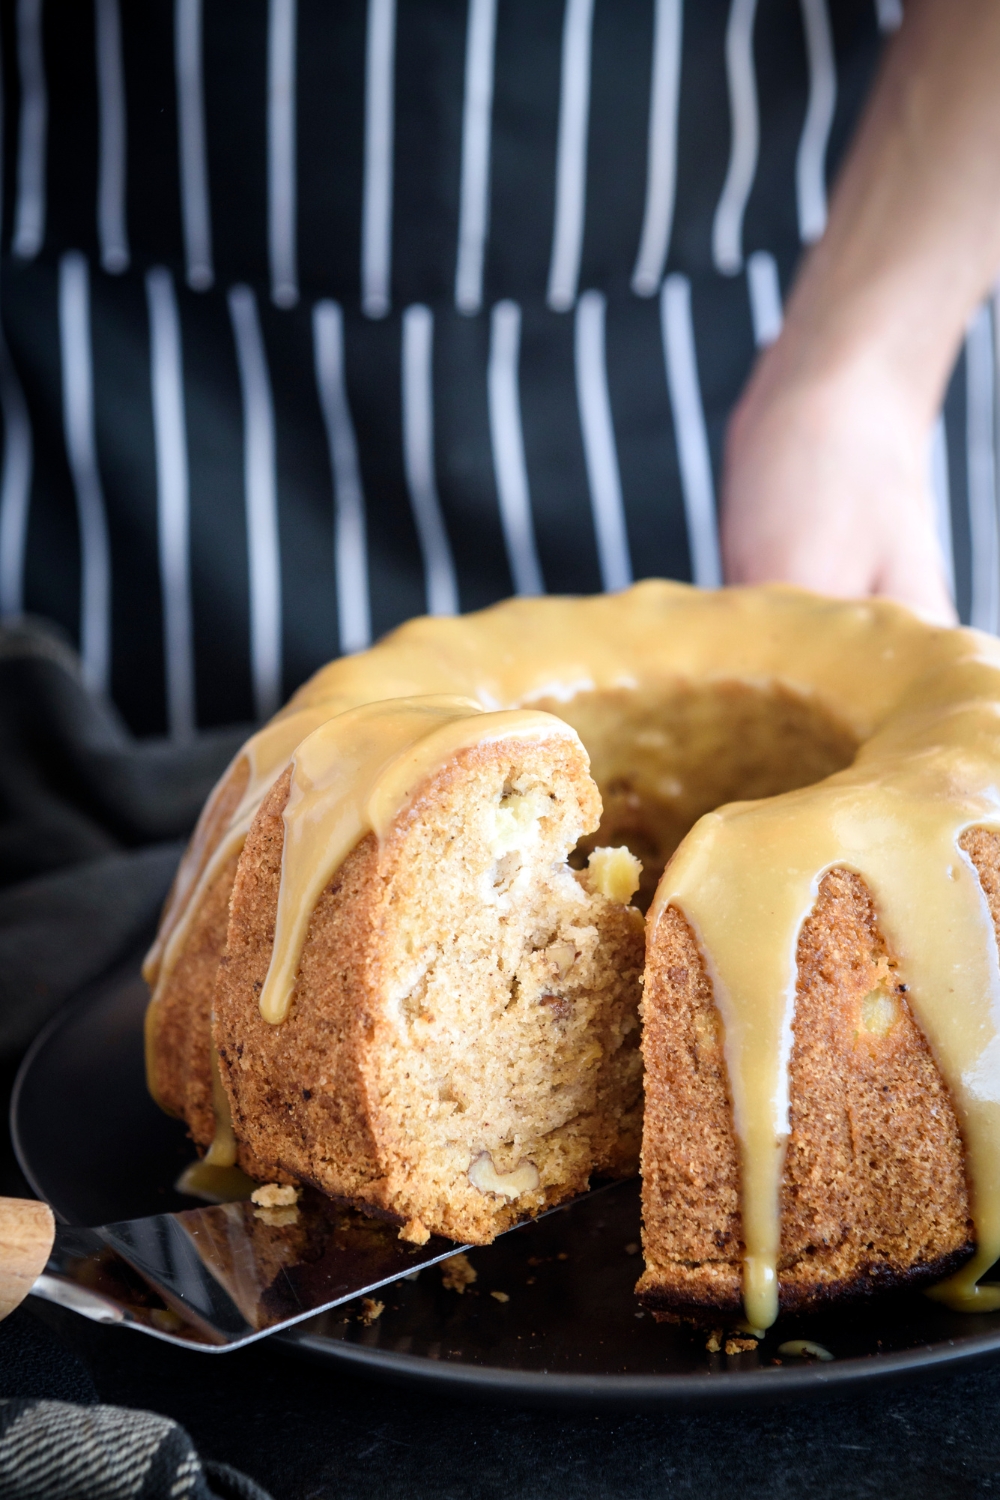 A bundt cake covered in a caramel glaze with a slice being removed.